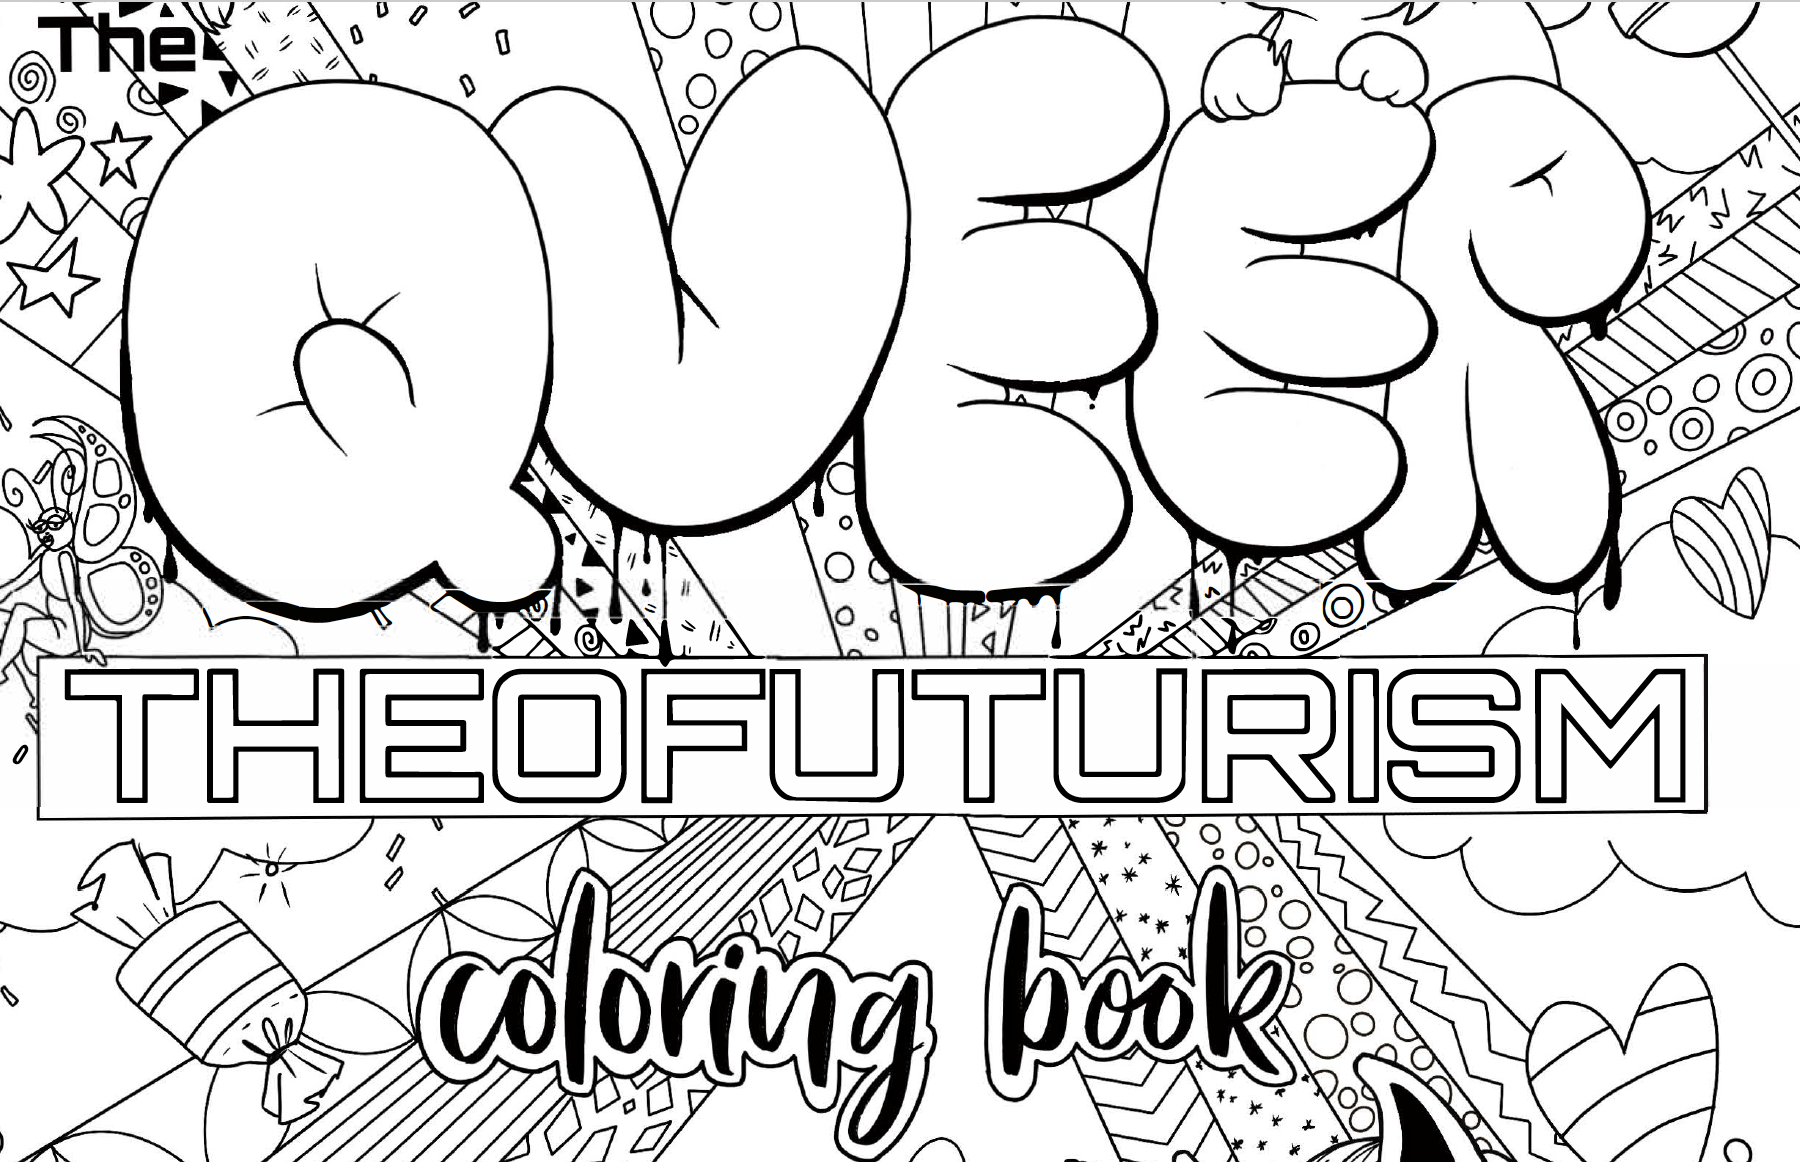 Queer Theofuturism: A Community Coloring Book for LGBT History Month